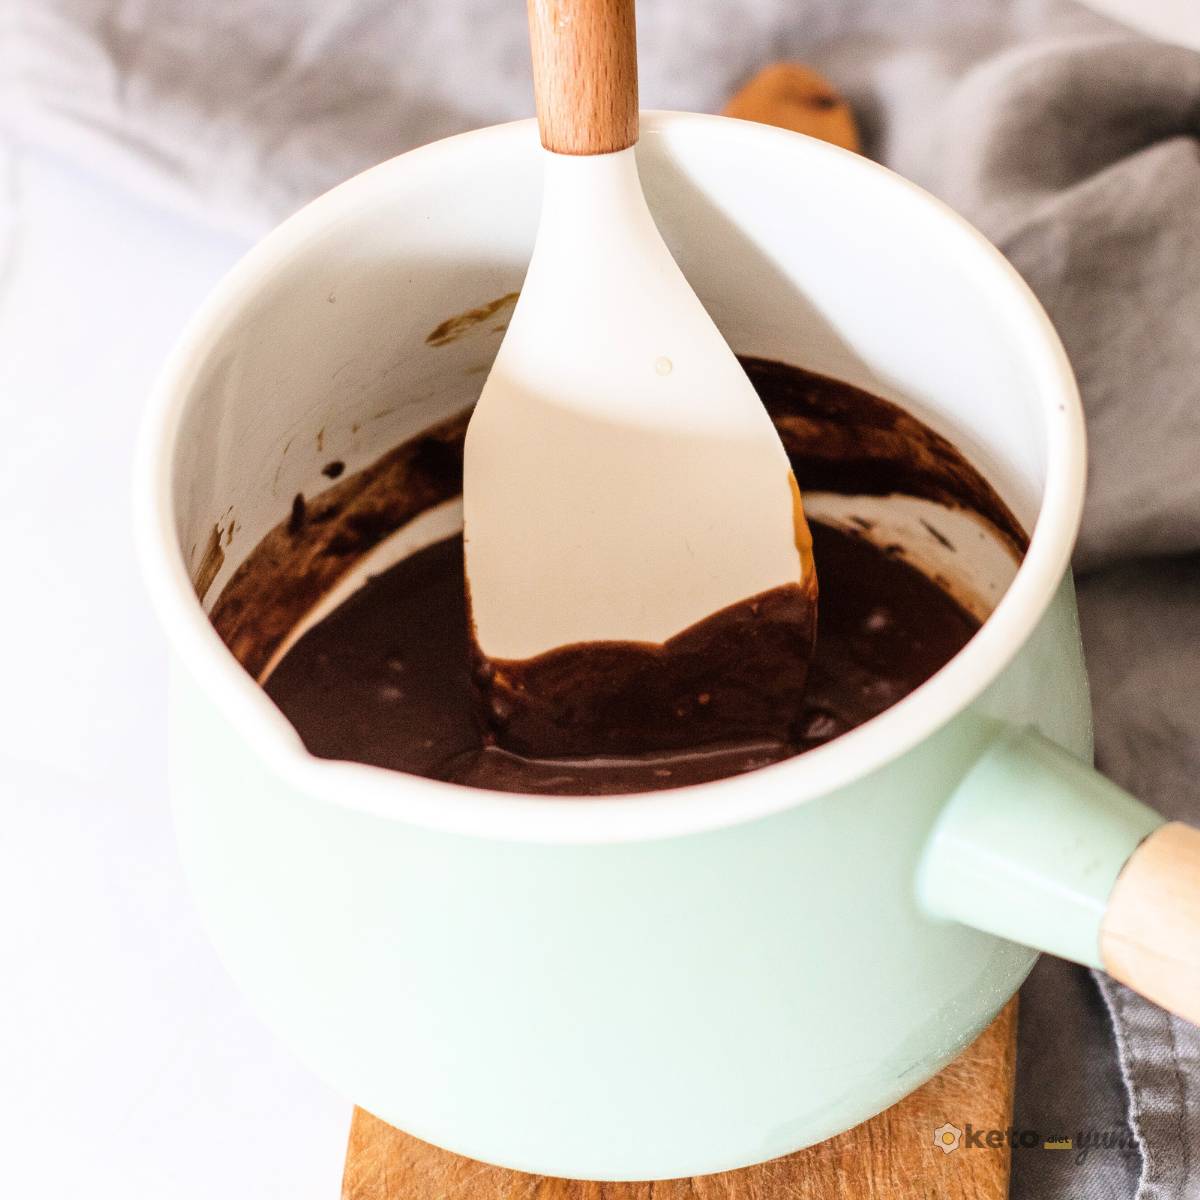 Melting chocolate in a saucepan